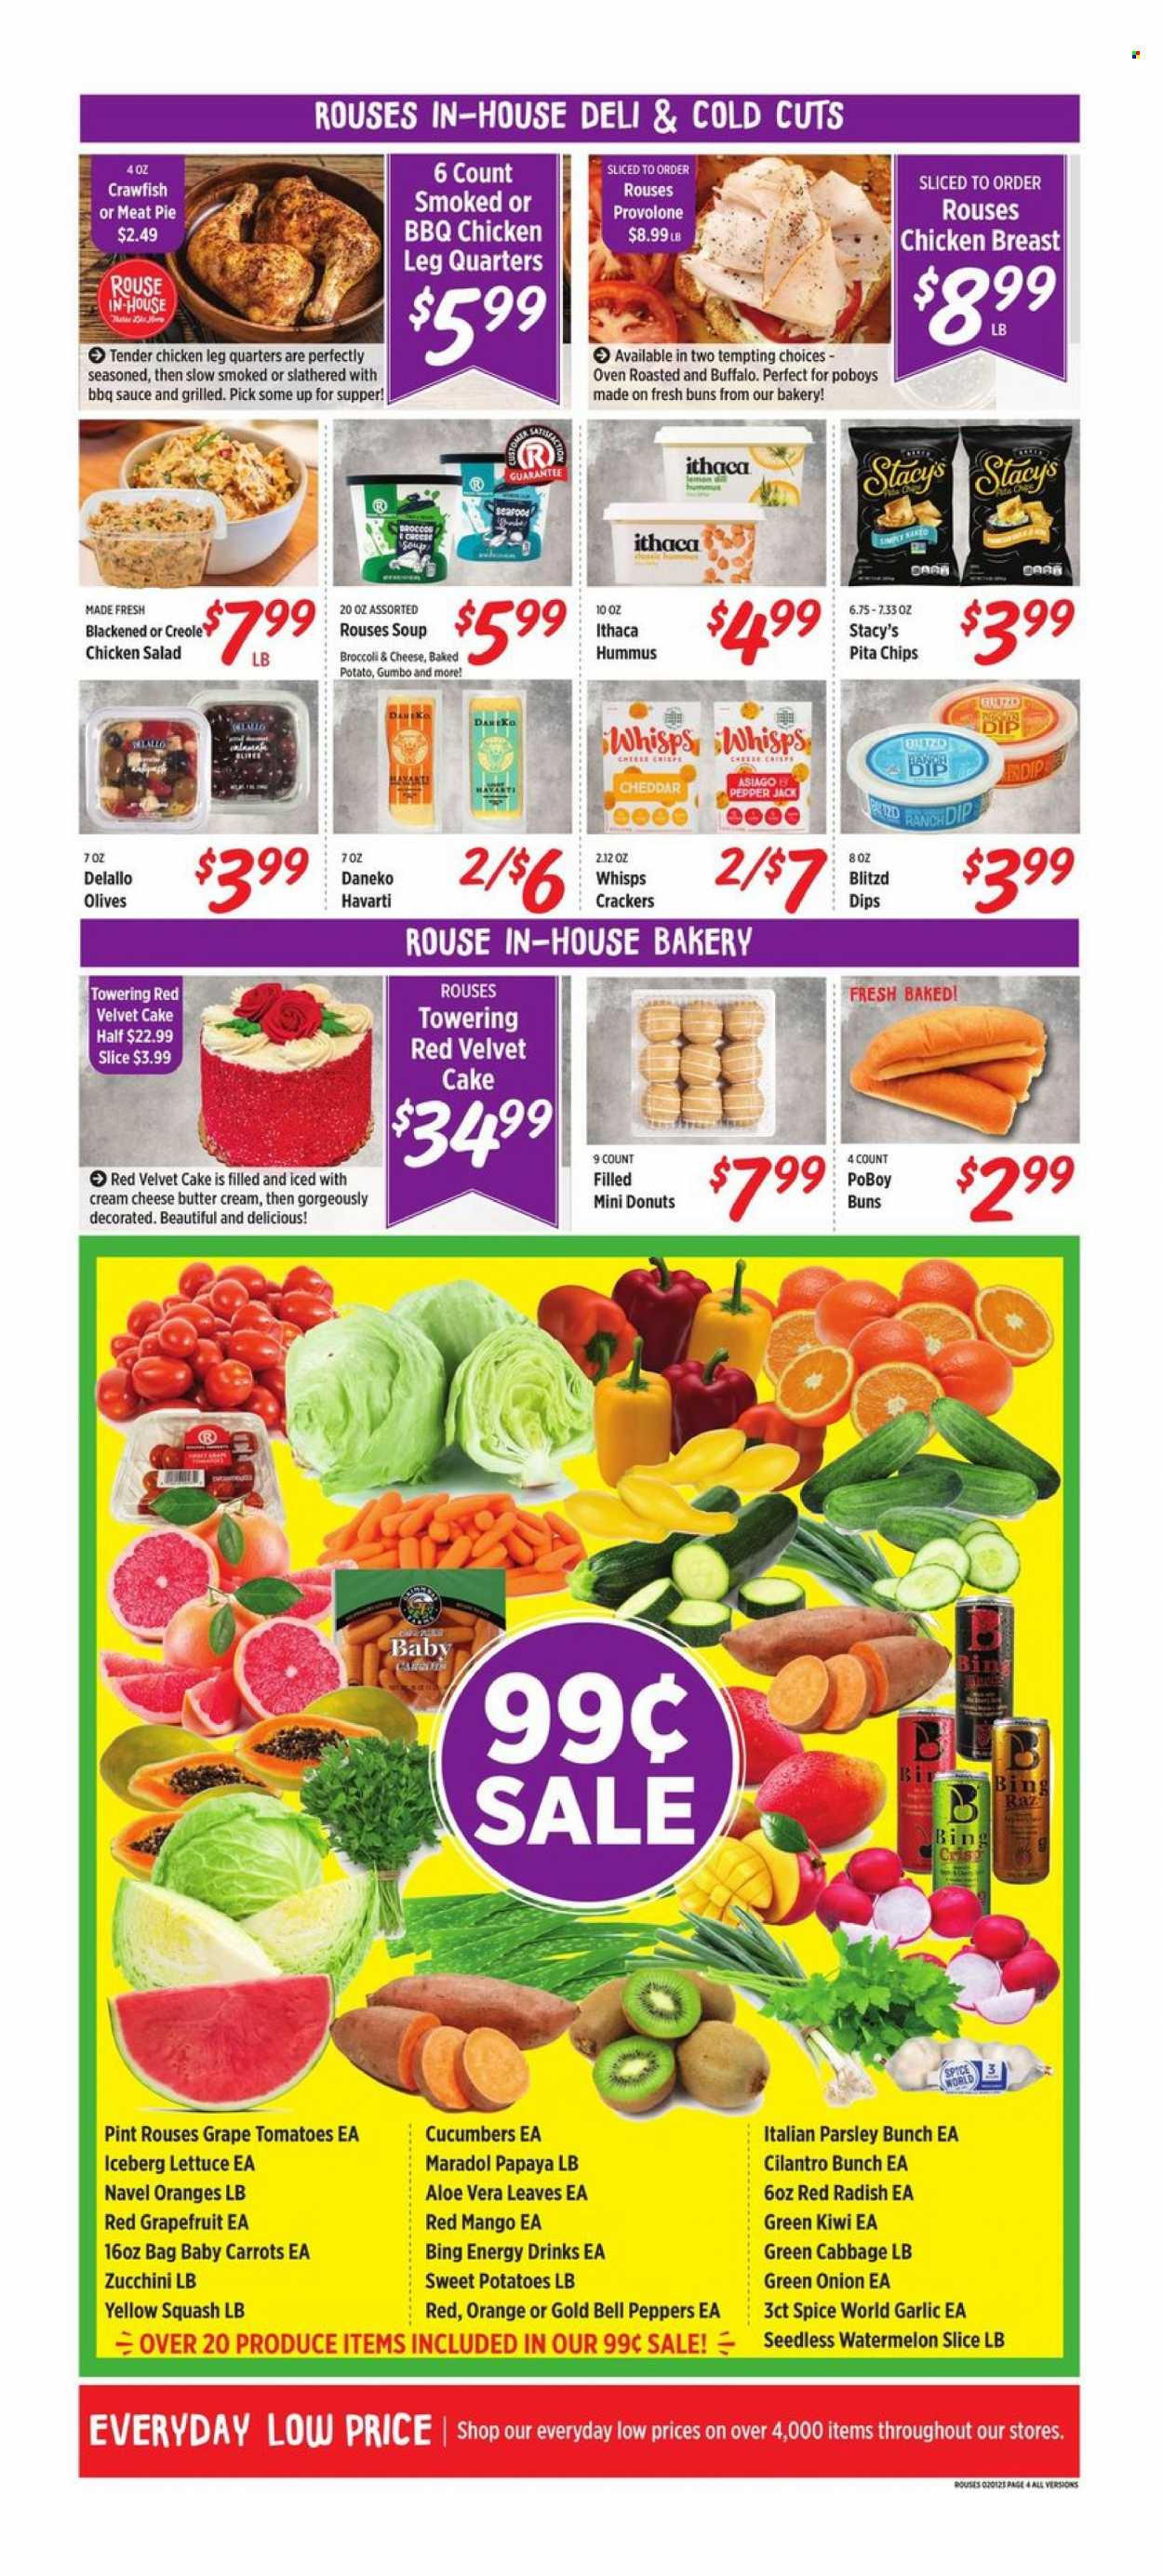 thumbnail - Rouses Markets Flyer - 02/01/2023 - 02/08/2023 - Sales products - cake, pie, buns, donut, bell peppers, broccoli, cabbage, carrots, cucumber, garlic, radishes, sweet potato, tomatoes, zucchini, potatoes, parsley, lettuce, salad, peppers, green onion, yellow squash, grapefruits, kiwi, mango, watermelon, papaya, oranges, soup, hummus, chicken salad, asiago, Havarti, Pepper Jack cheese, Provolone, butter, dip, crawfish, crackers, chips, pita chips, olives, cilantro, spice, BBQ sauce, energy drink, chicken breasts, chicken legs, navel oranges. Page 4.